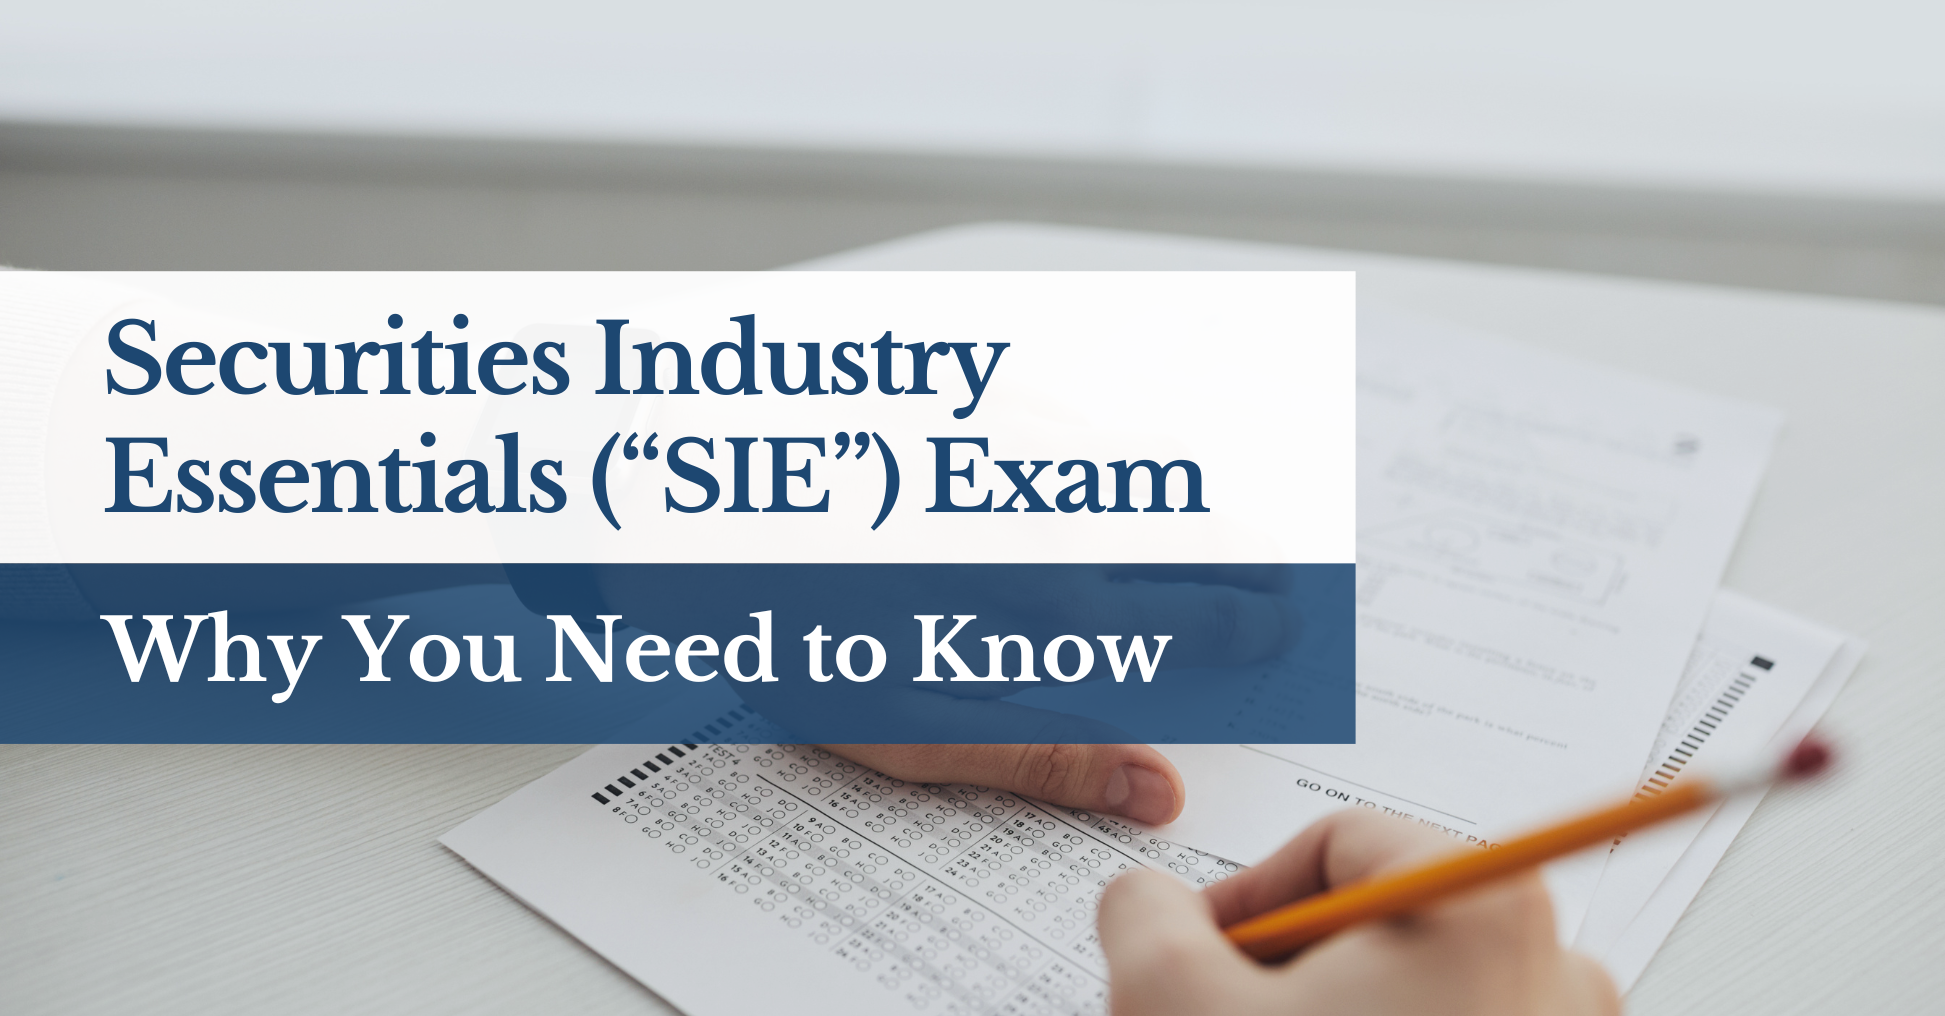 Securities Industry Essentials (“SIE”) Exam: What You Need to Know